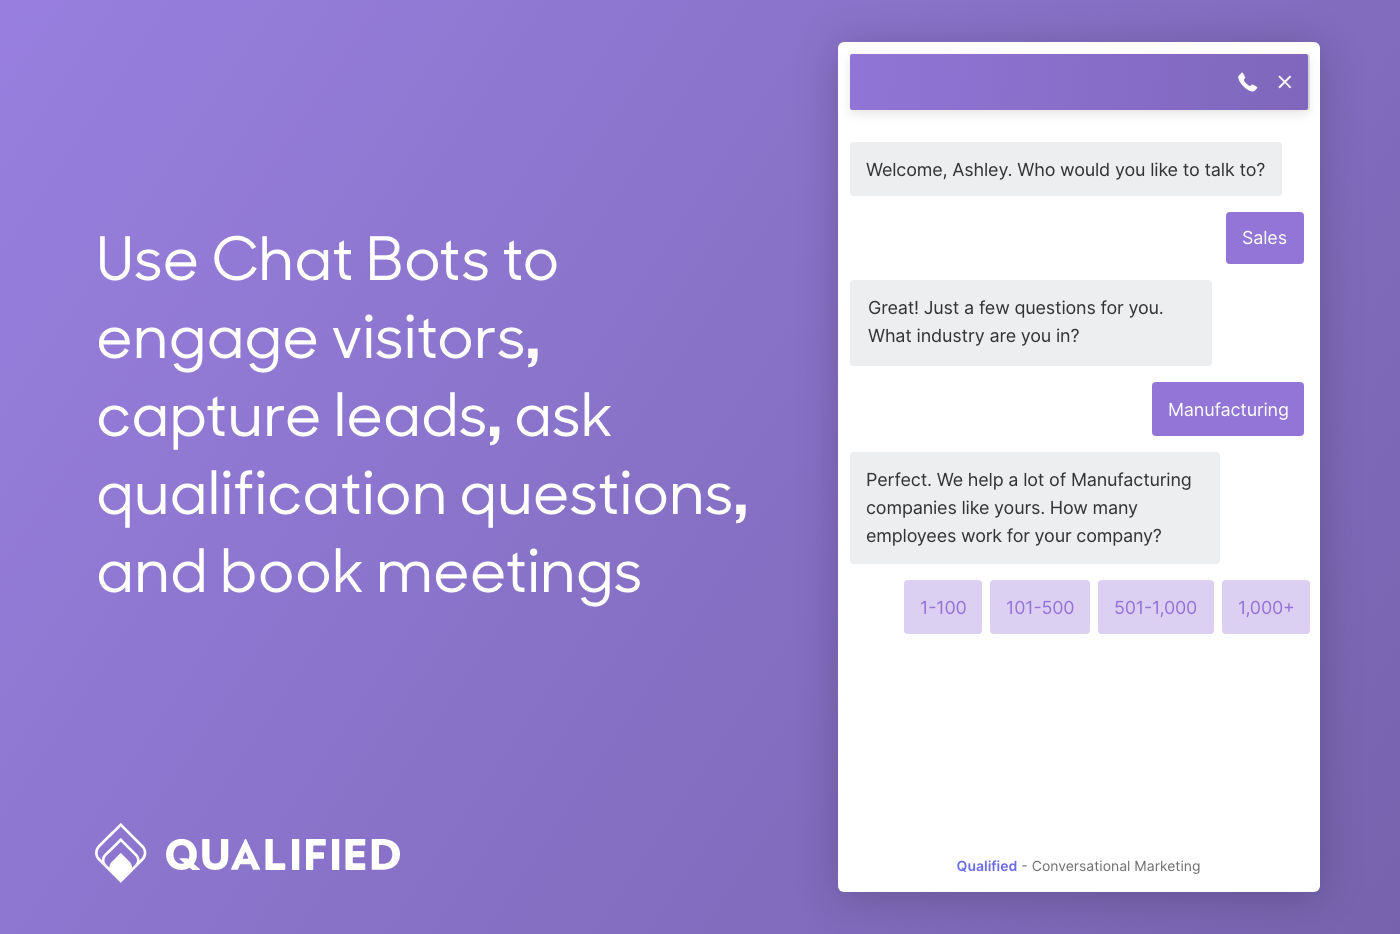 Use Chat Bots to engage visitors, capture leads, ask qualification questions, and book sales meetings.